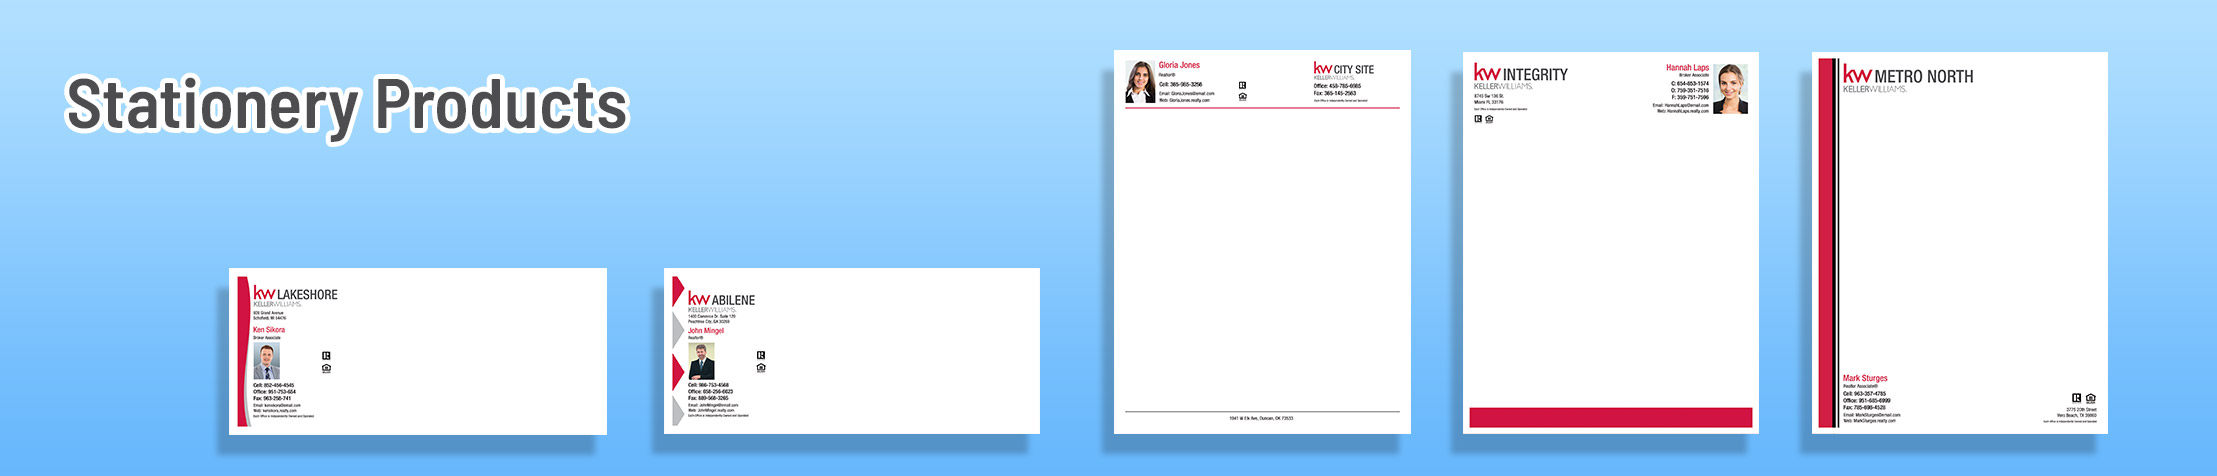 Keller Williams Real Estate Stationery Products - Custom Letterhead & Envelopes Stationery Products for Realtors | Sparkprint.com